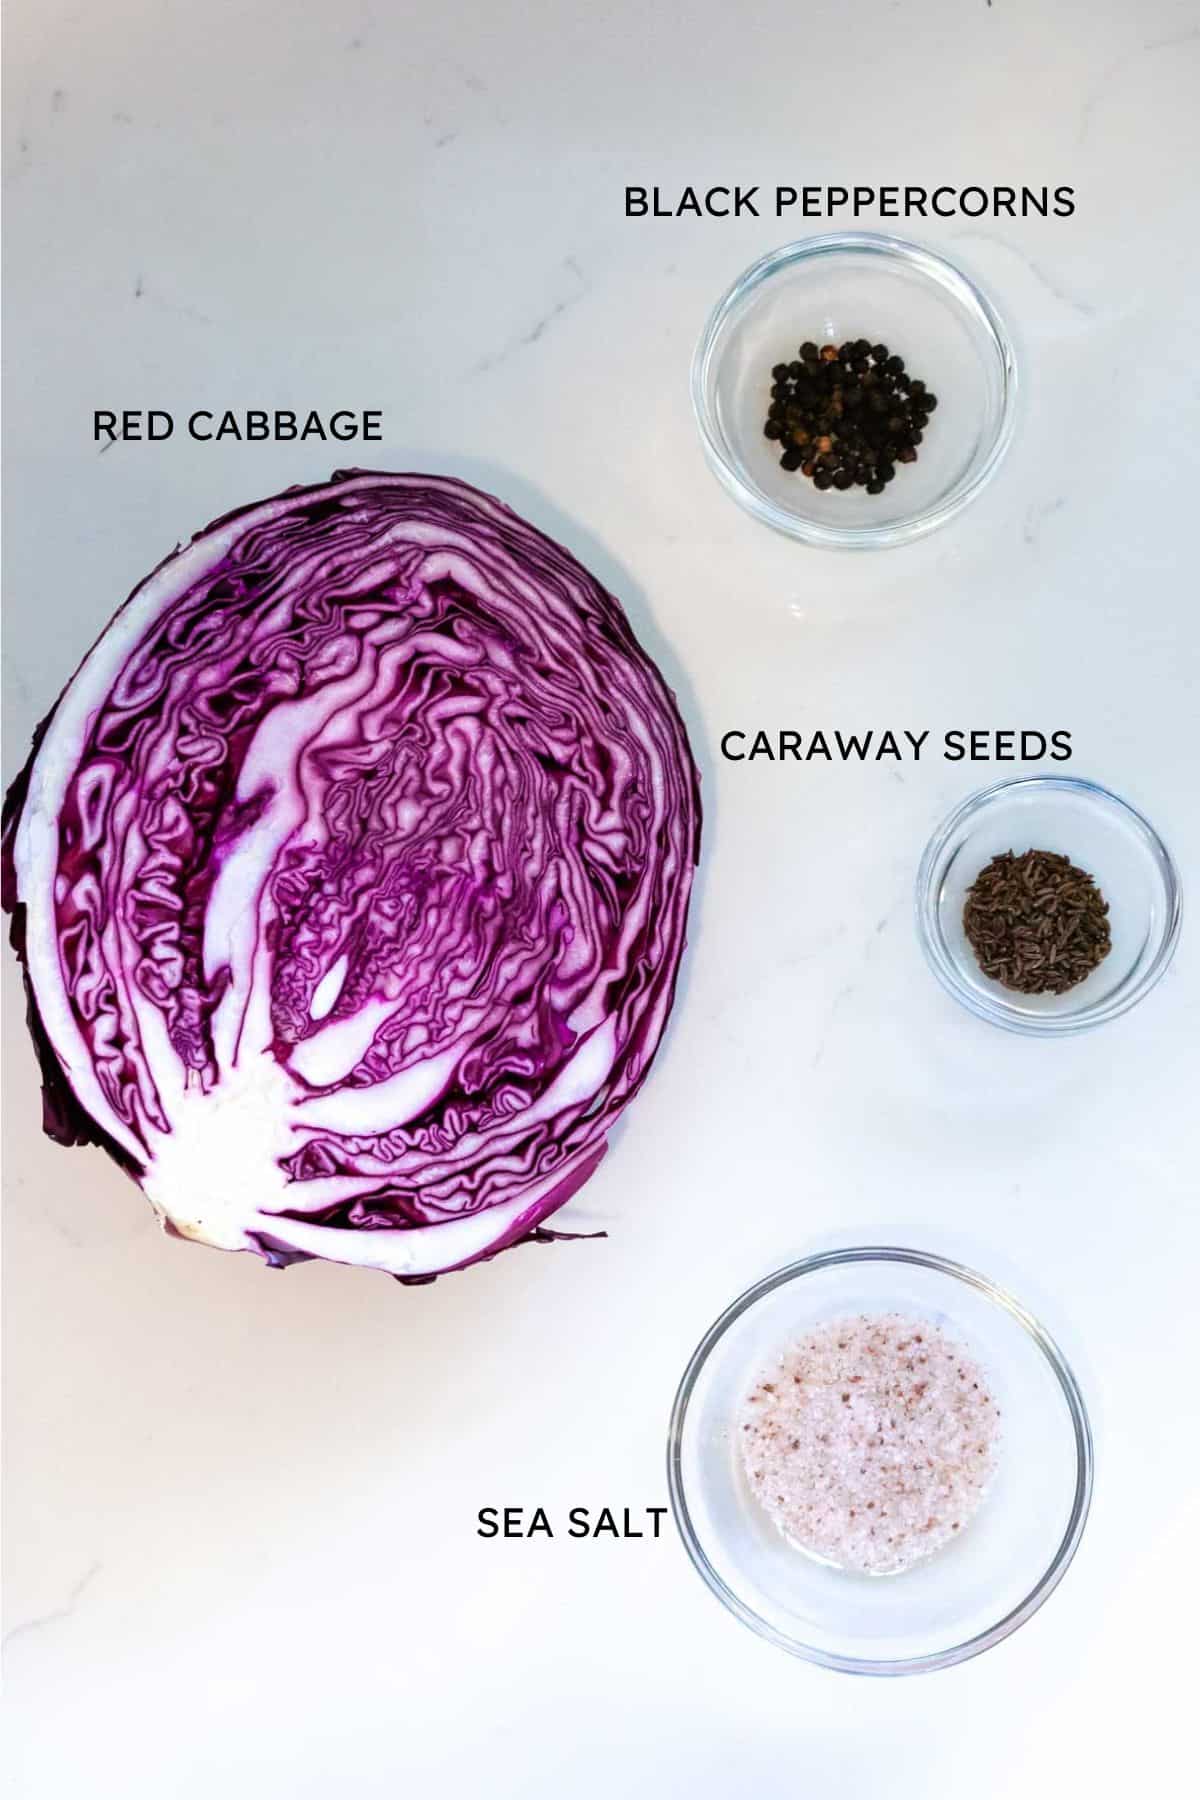 labeled ingredients for red cabbage kraut.